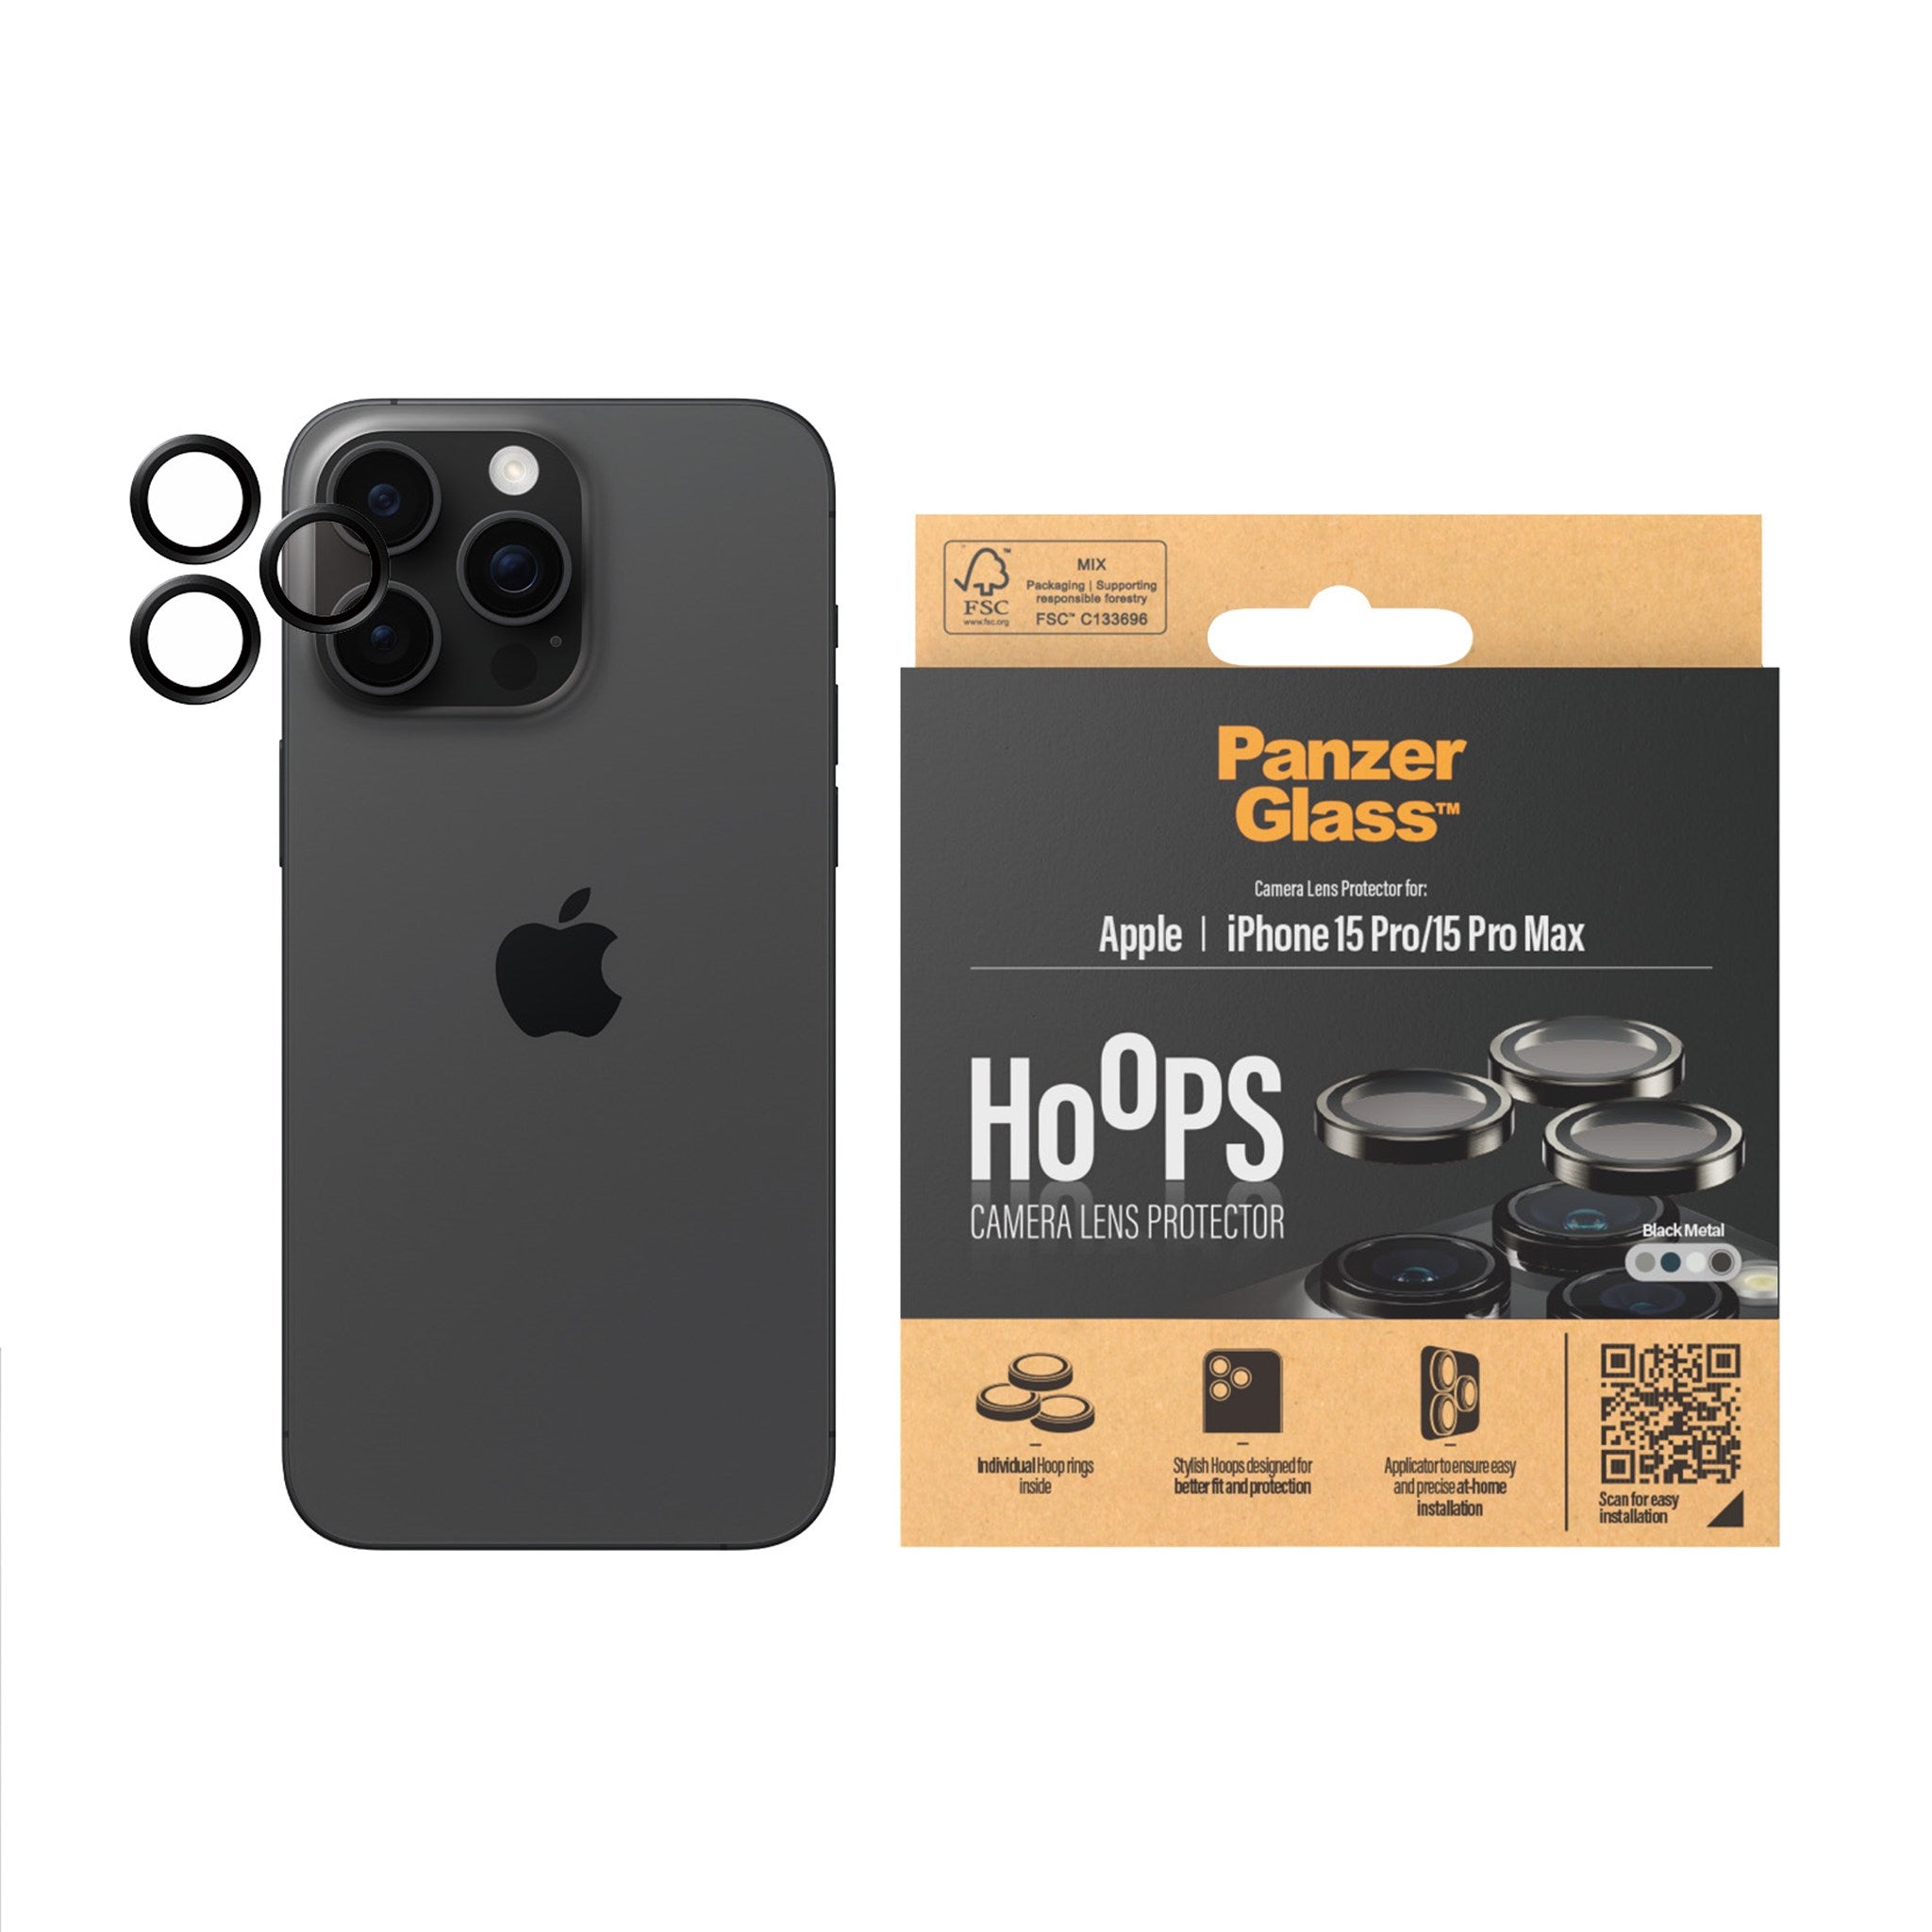 PanzerGlass® Hoops Camera Lens Protector iPhone 15 Pro, 15 Pro Max